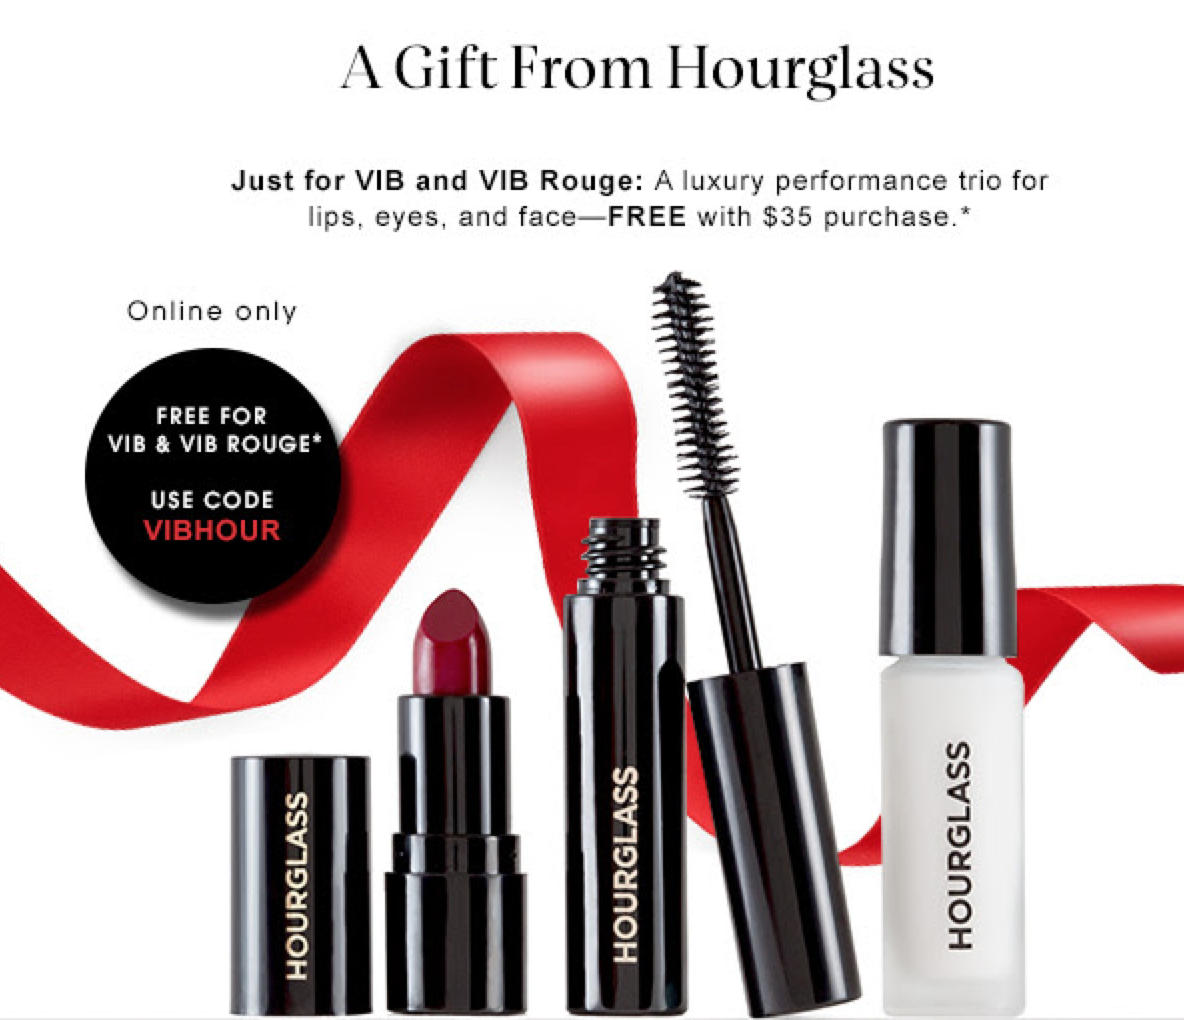 Sephora GWP from Hourglass - VIB & VIB Rouge Only